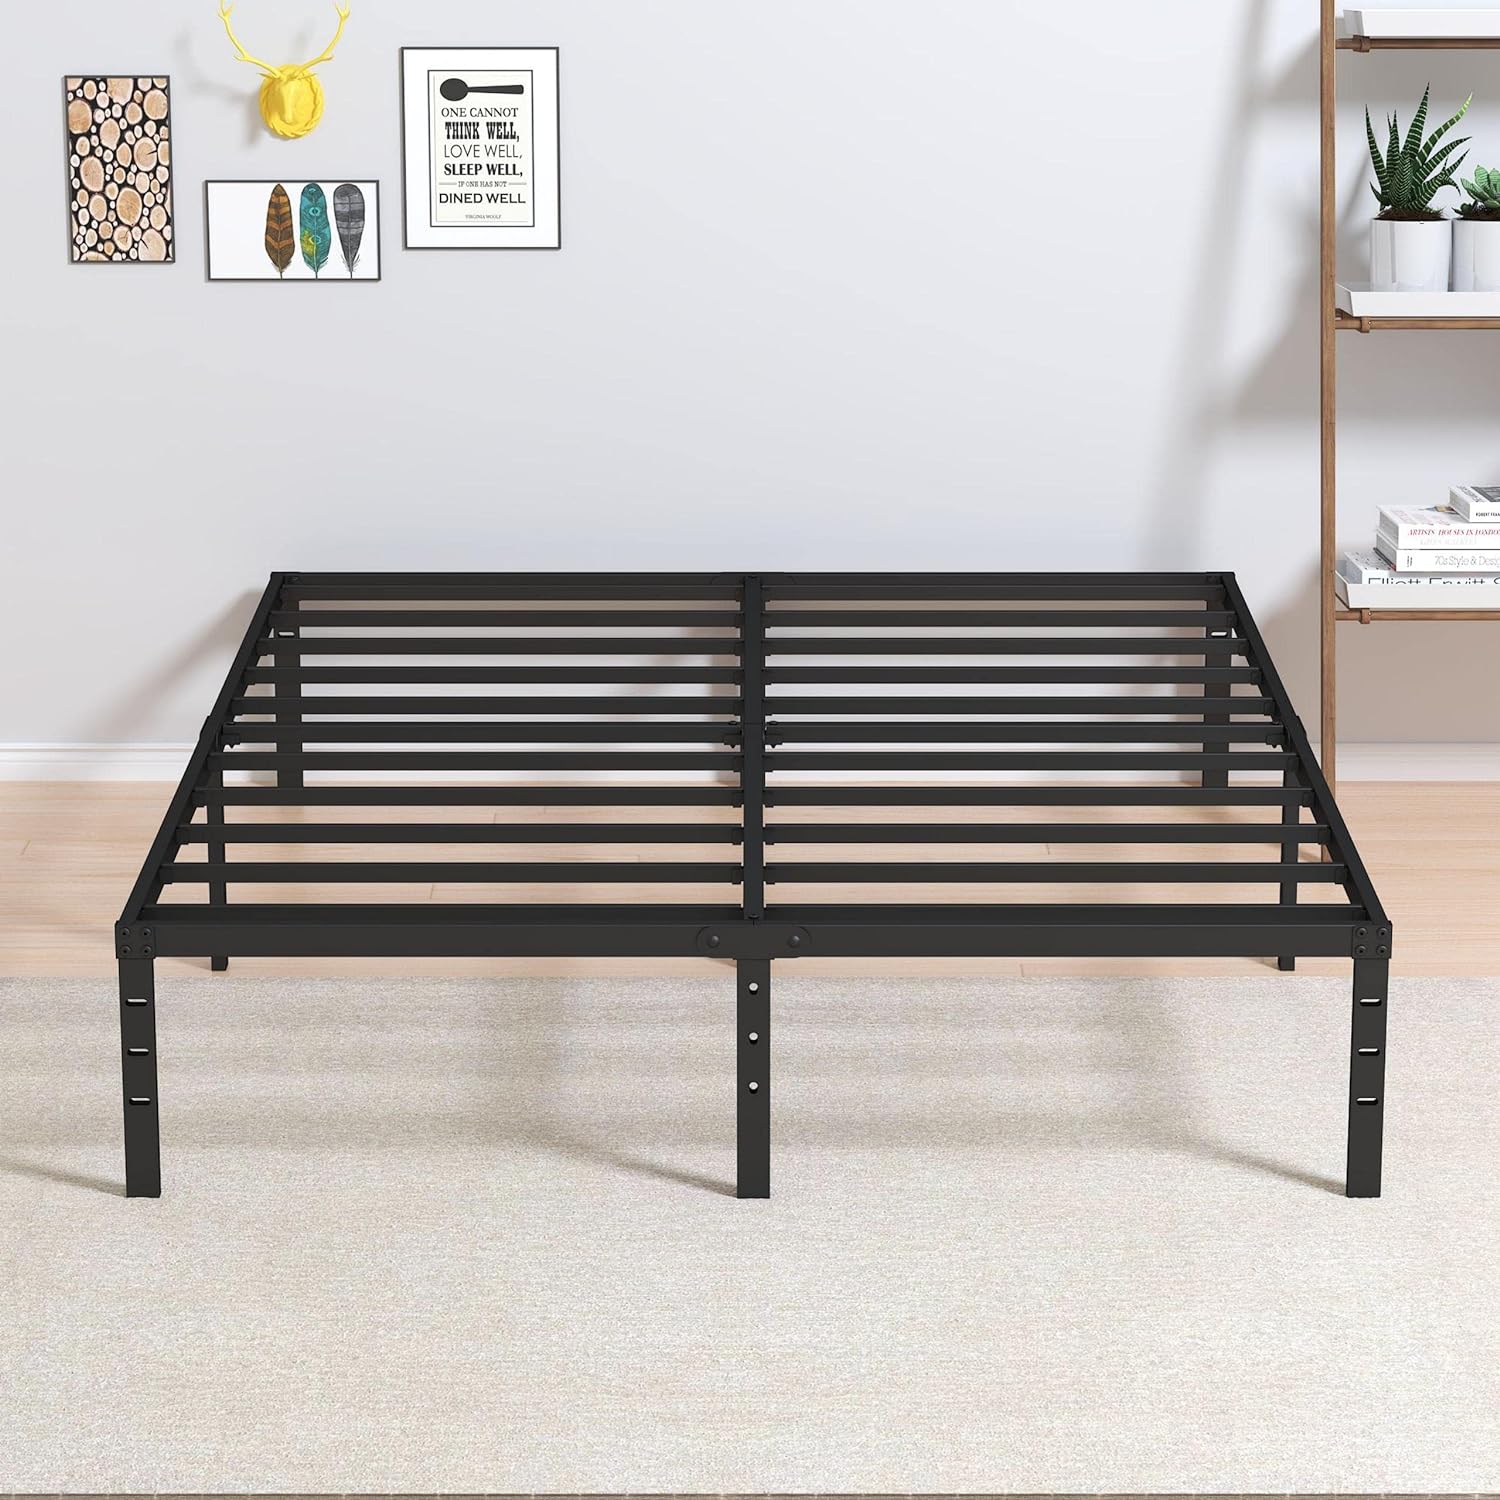 Hurry! Special Discounts on Maenizi 14 Inch Full Size Bed Frame - Unlock Savings Now!